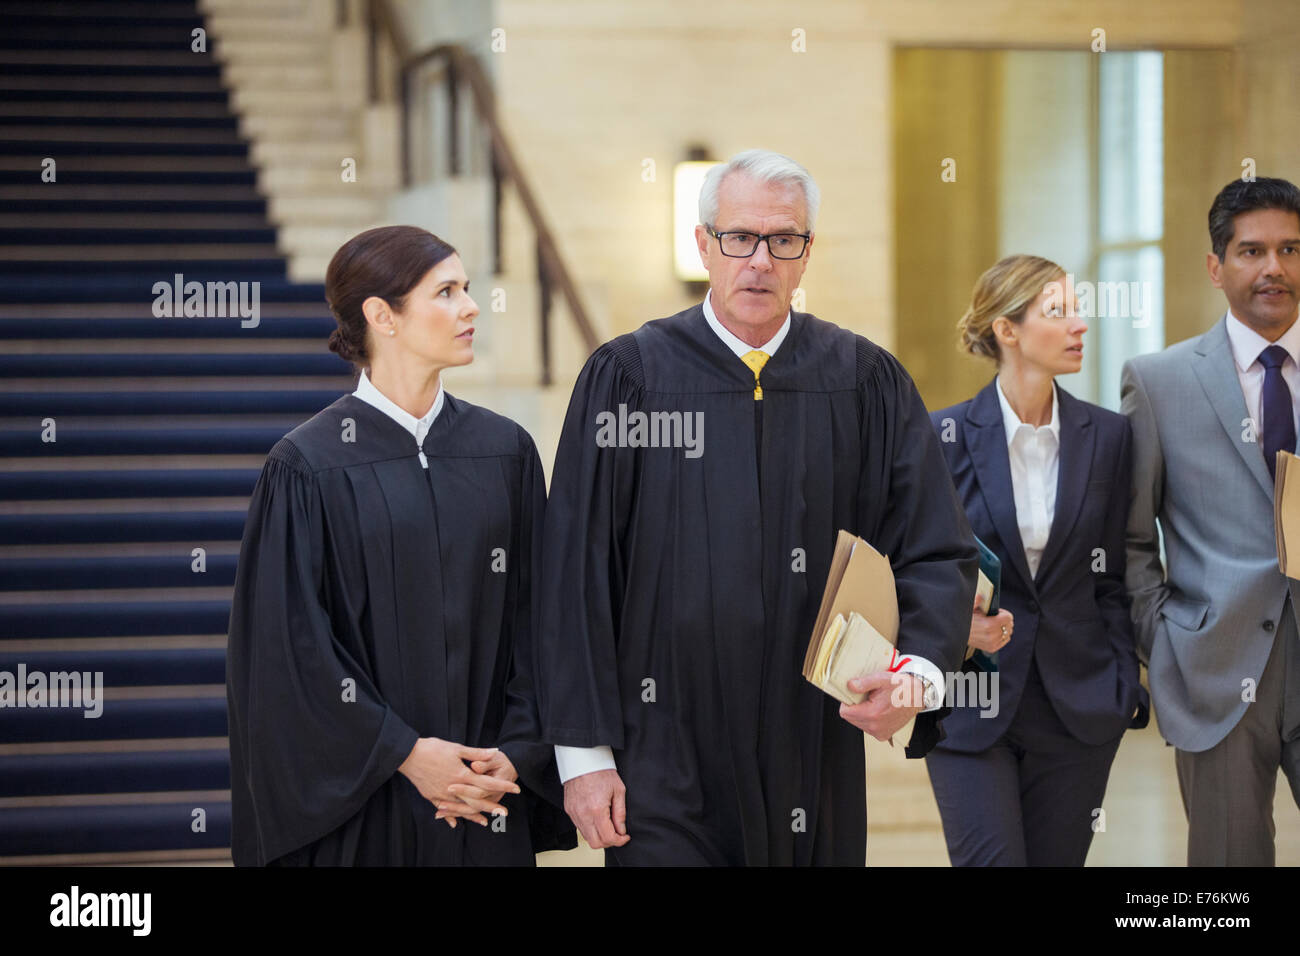 Judges and lawyers walking through courthouse Stock Photo